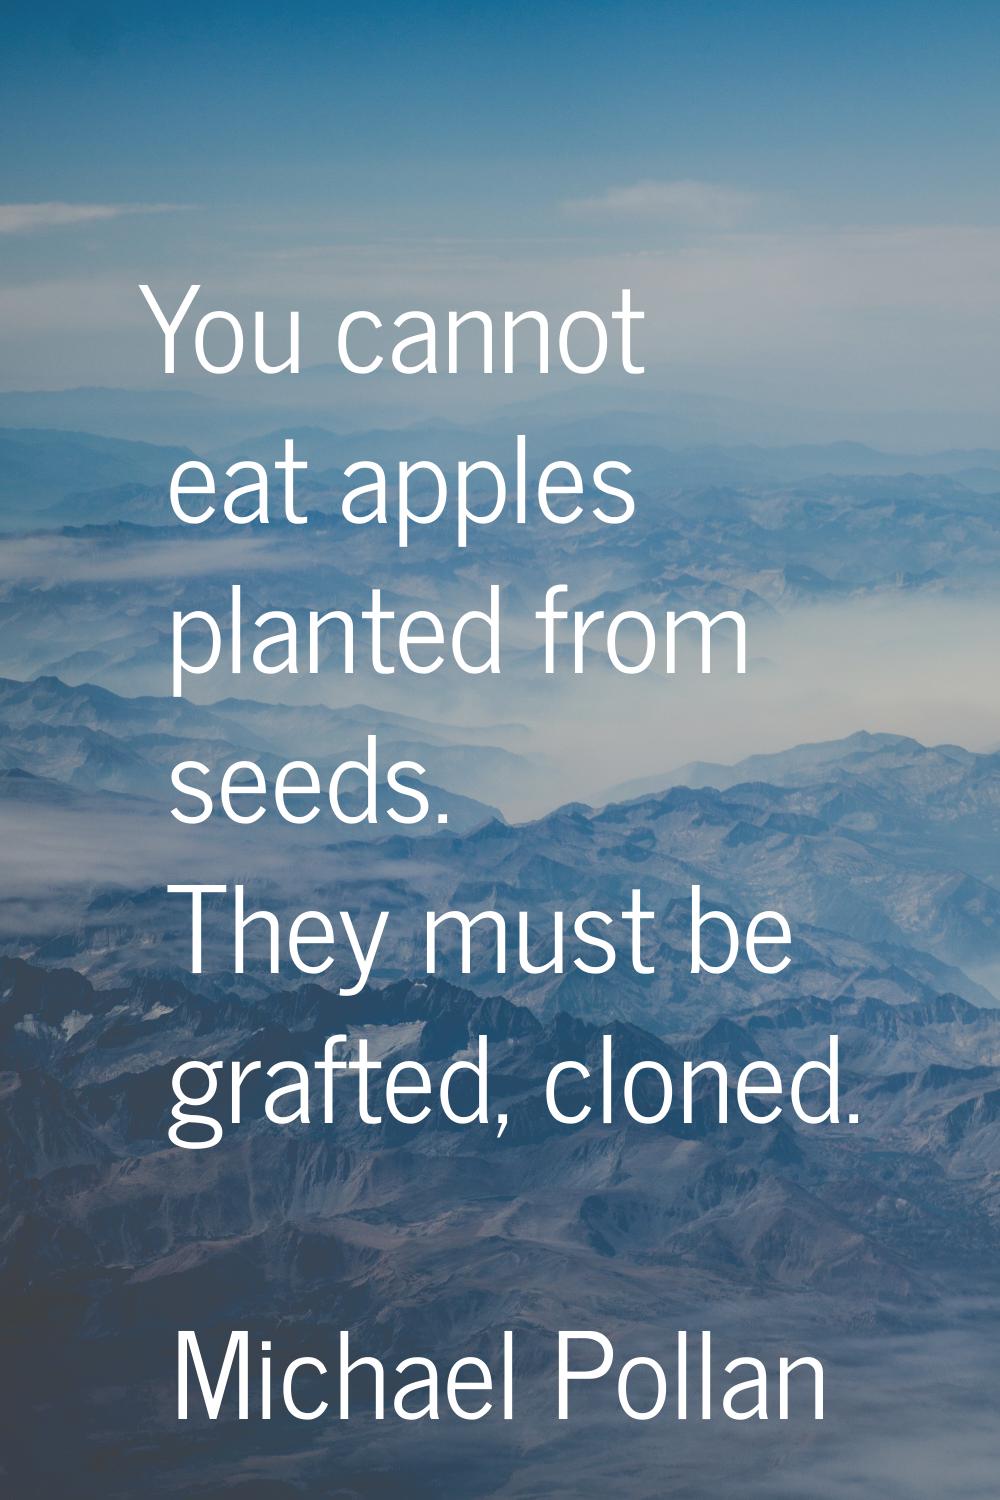 You cannot eat apples planted from seeds. They must be grafted, cloned.